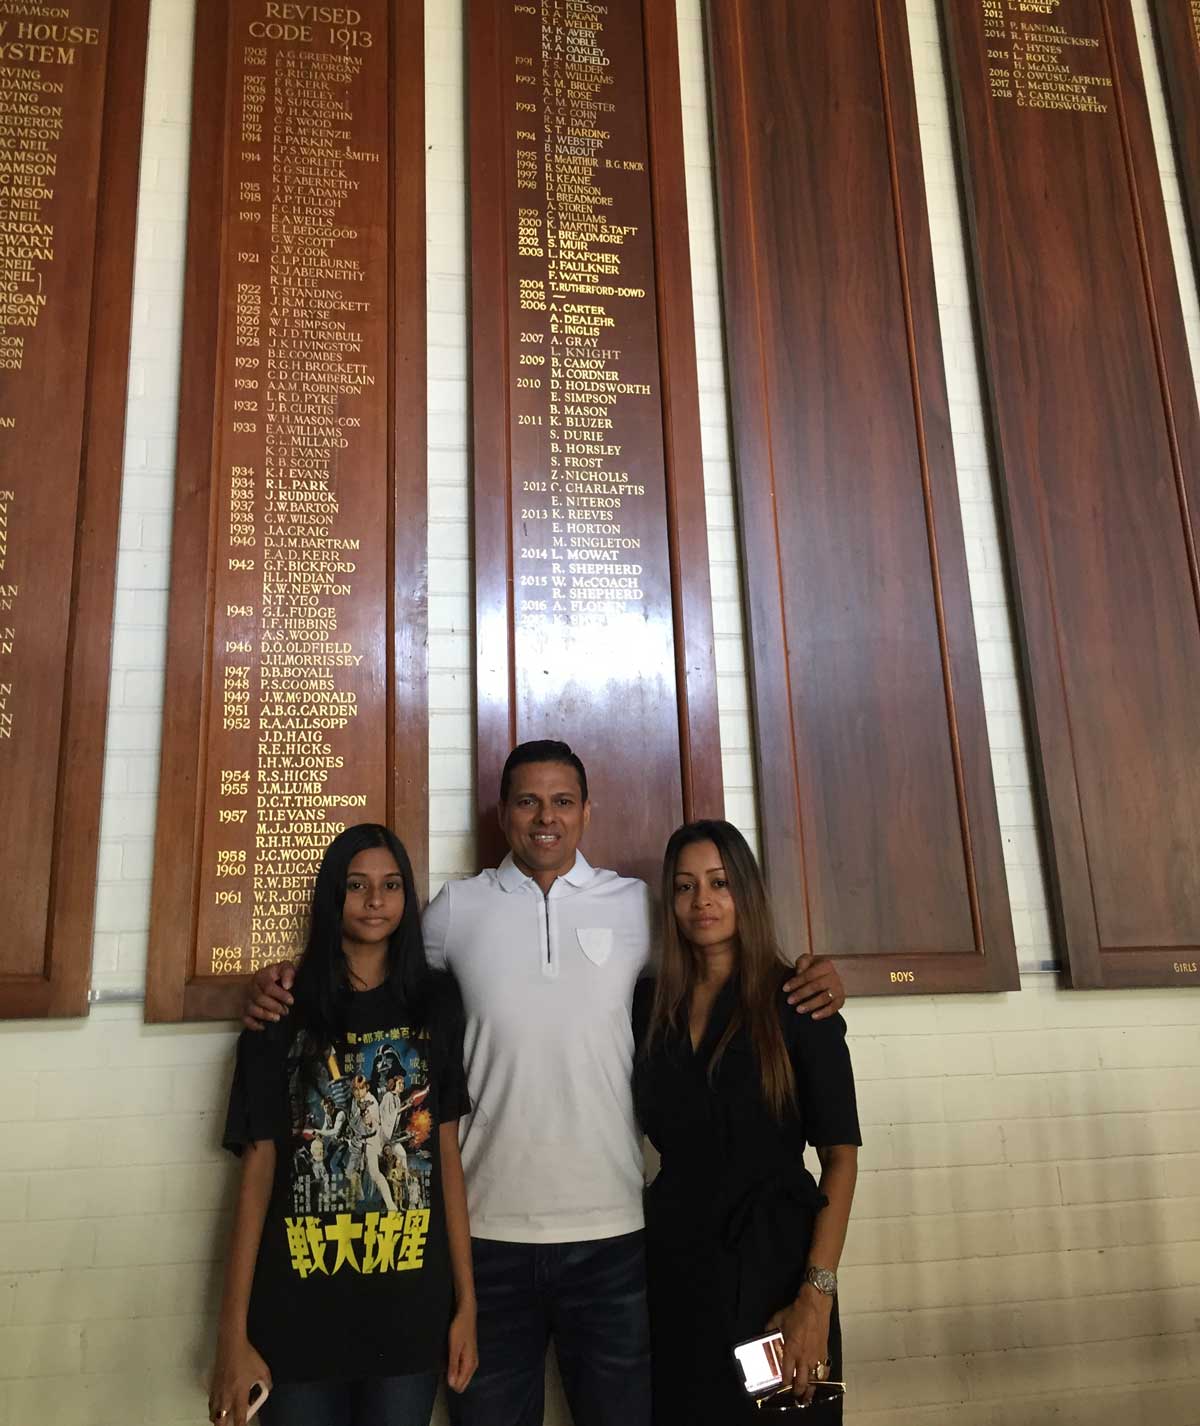 Nilantha Ratanayake (OW1987) at centre, with his daughter Dharini at left and wife Dayanthi at right, standing proudly in front of the Honour Boards at the St Kilda Road Campus